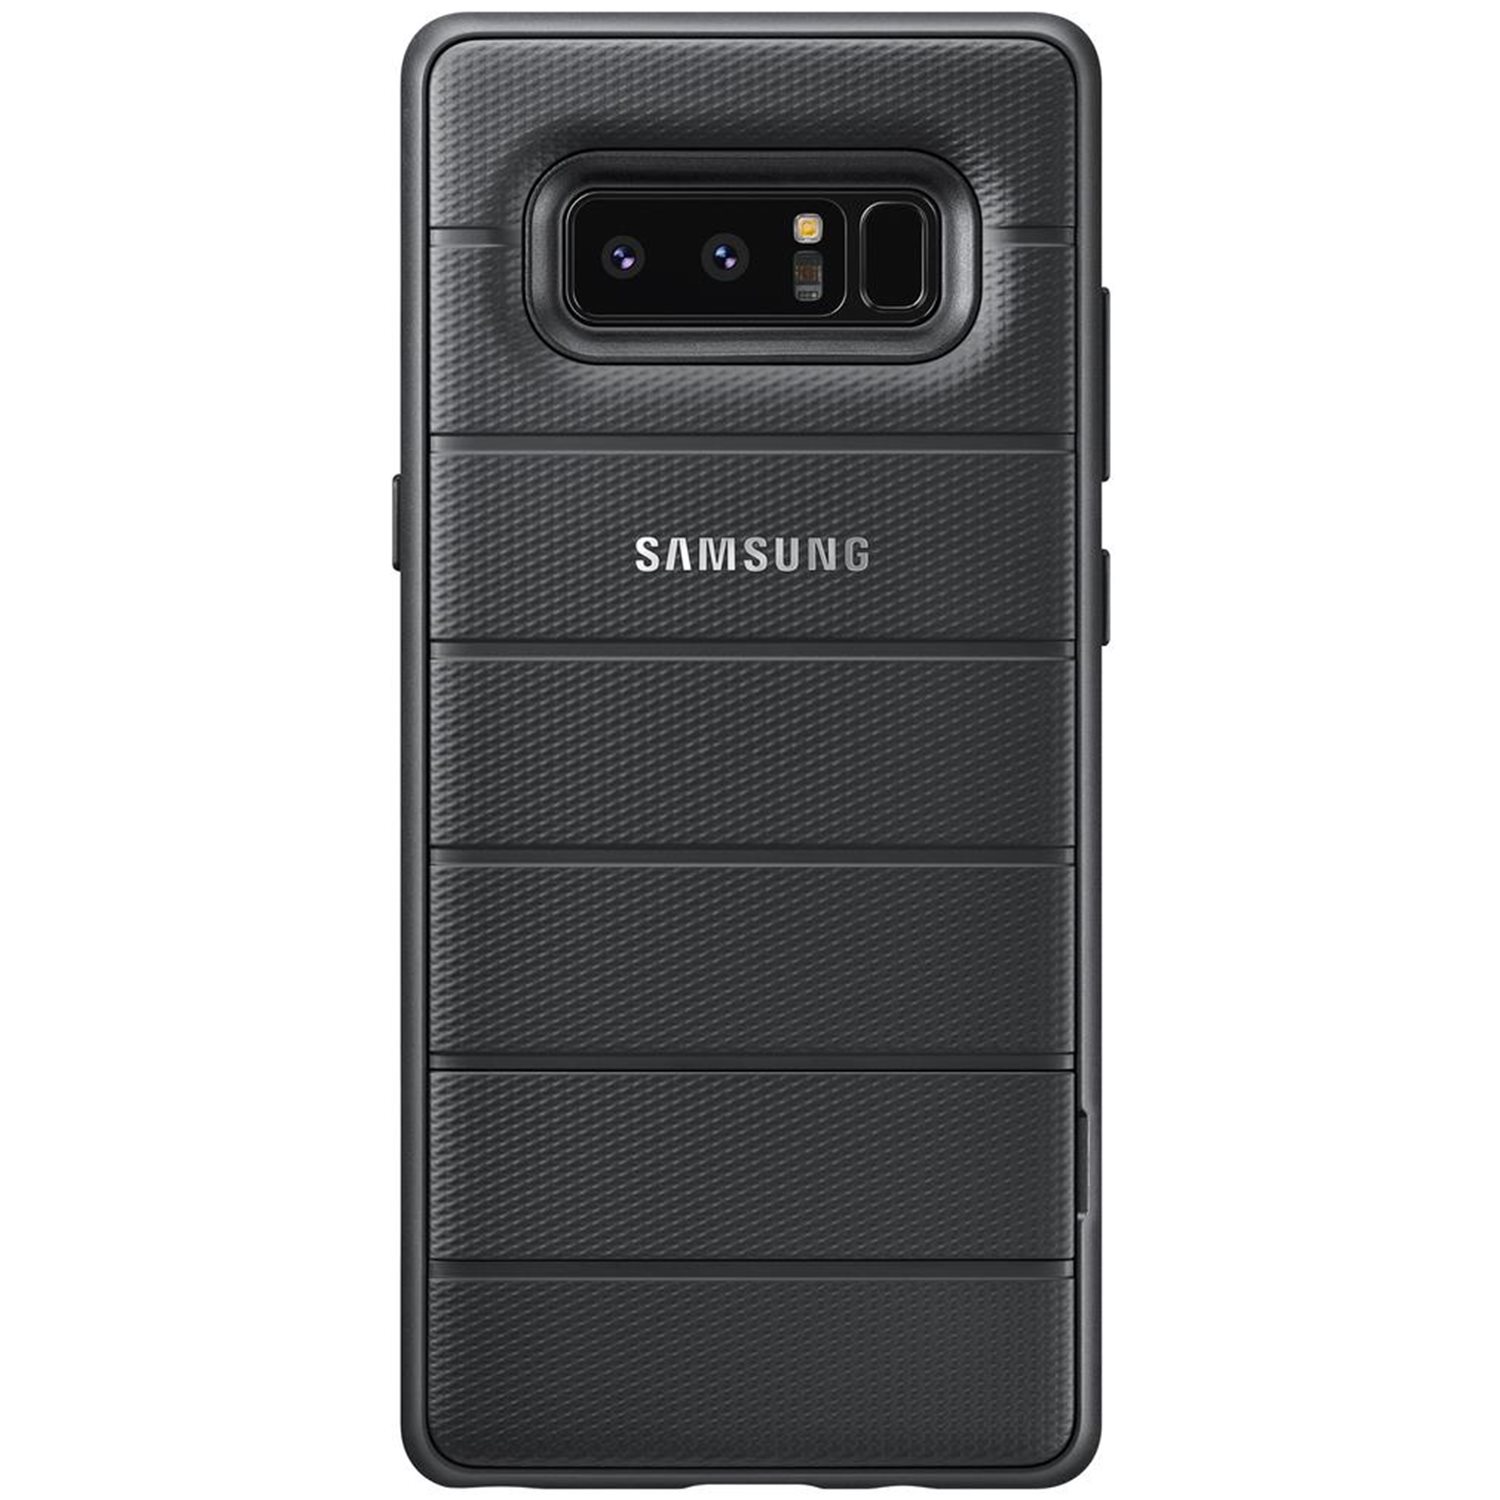 Official Samsung Galaxy Note 8 Protective Stand Cover Case - Black